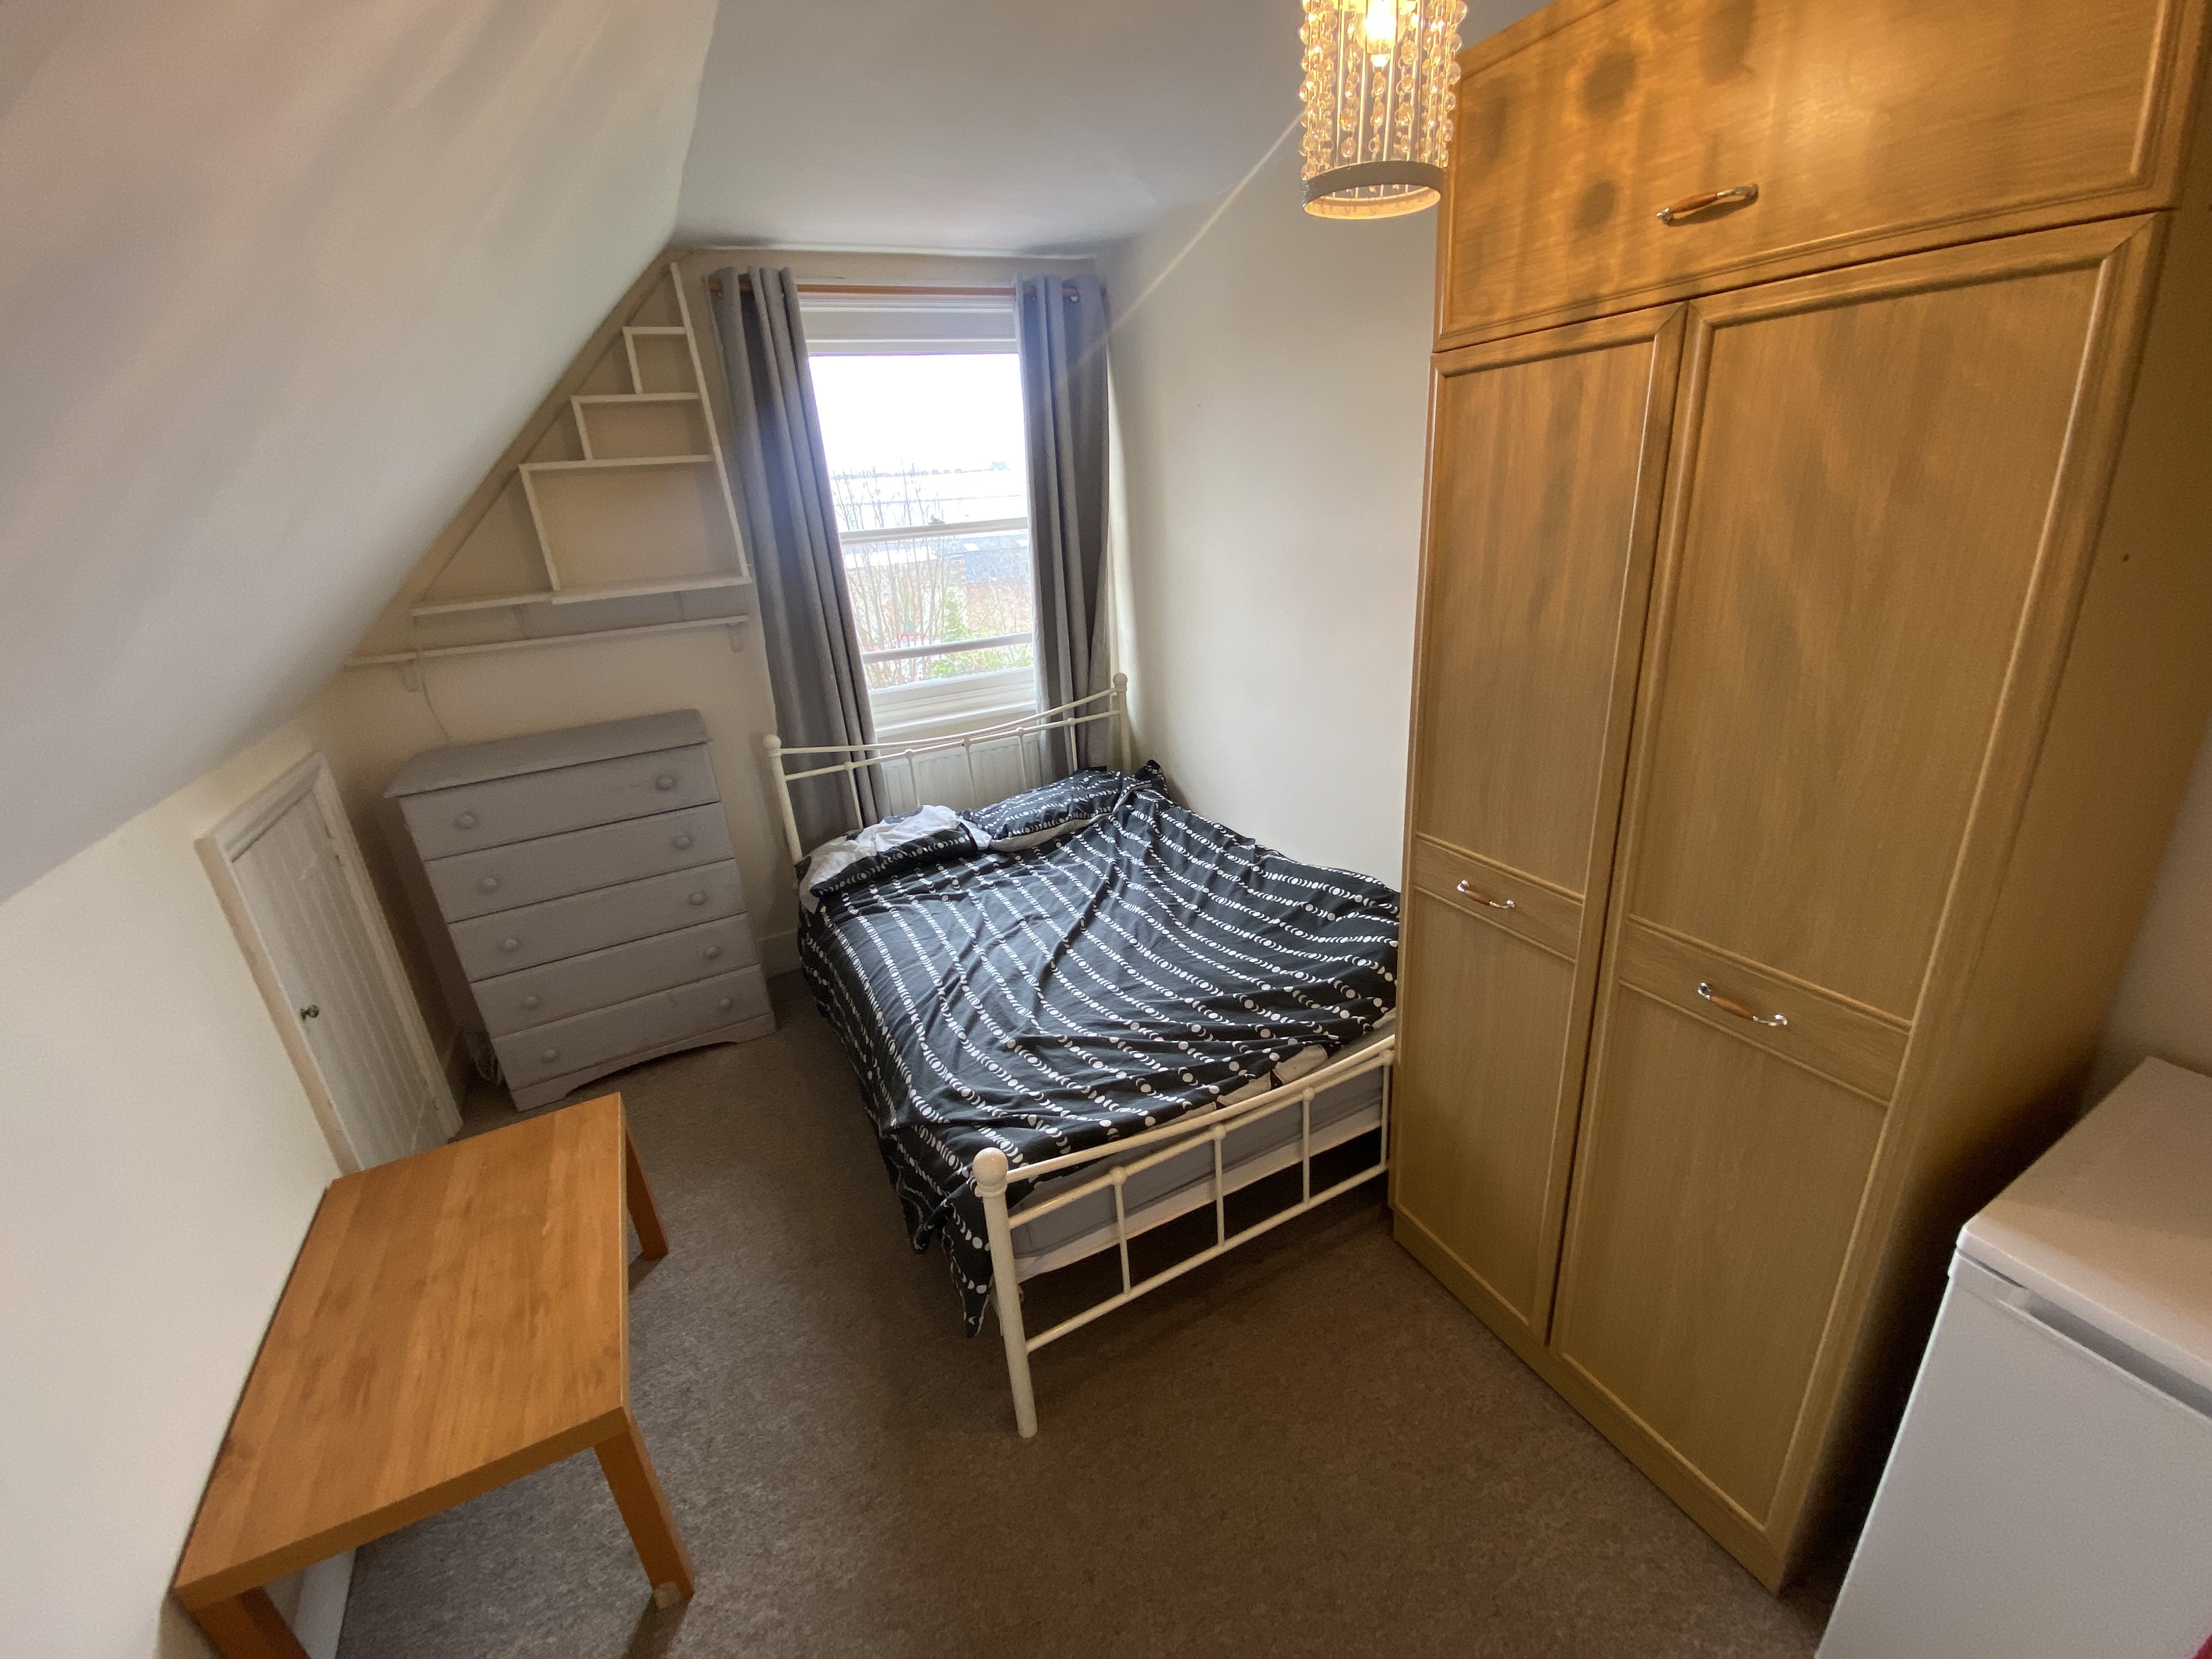 1 bed house / flat share to rent in Belvedere Road - Property Image 1